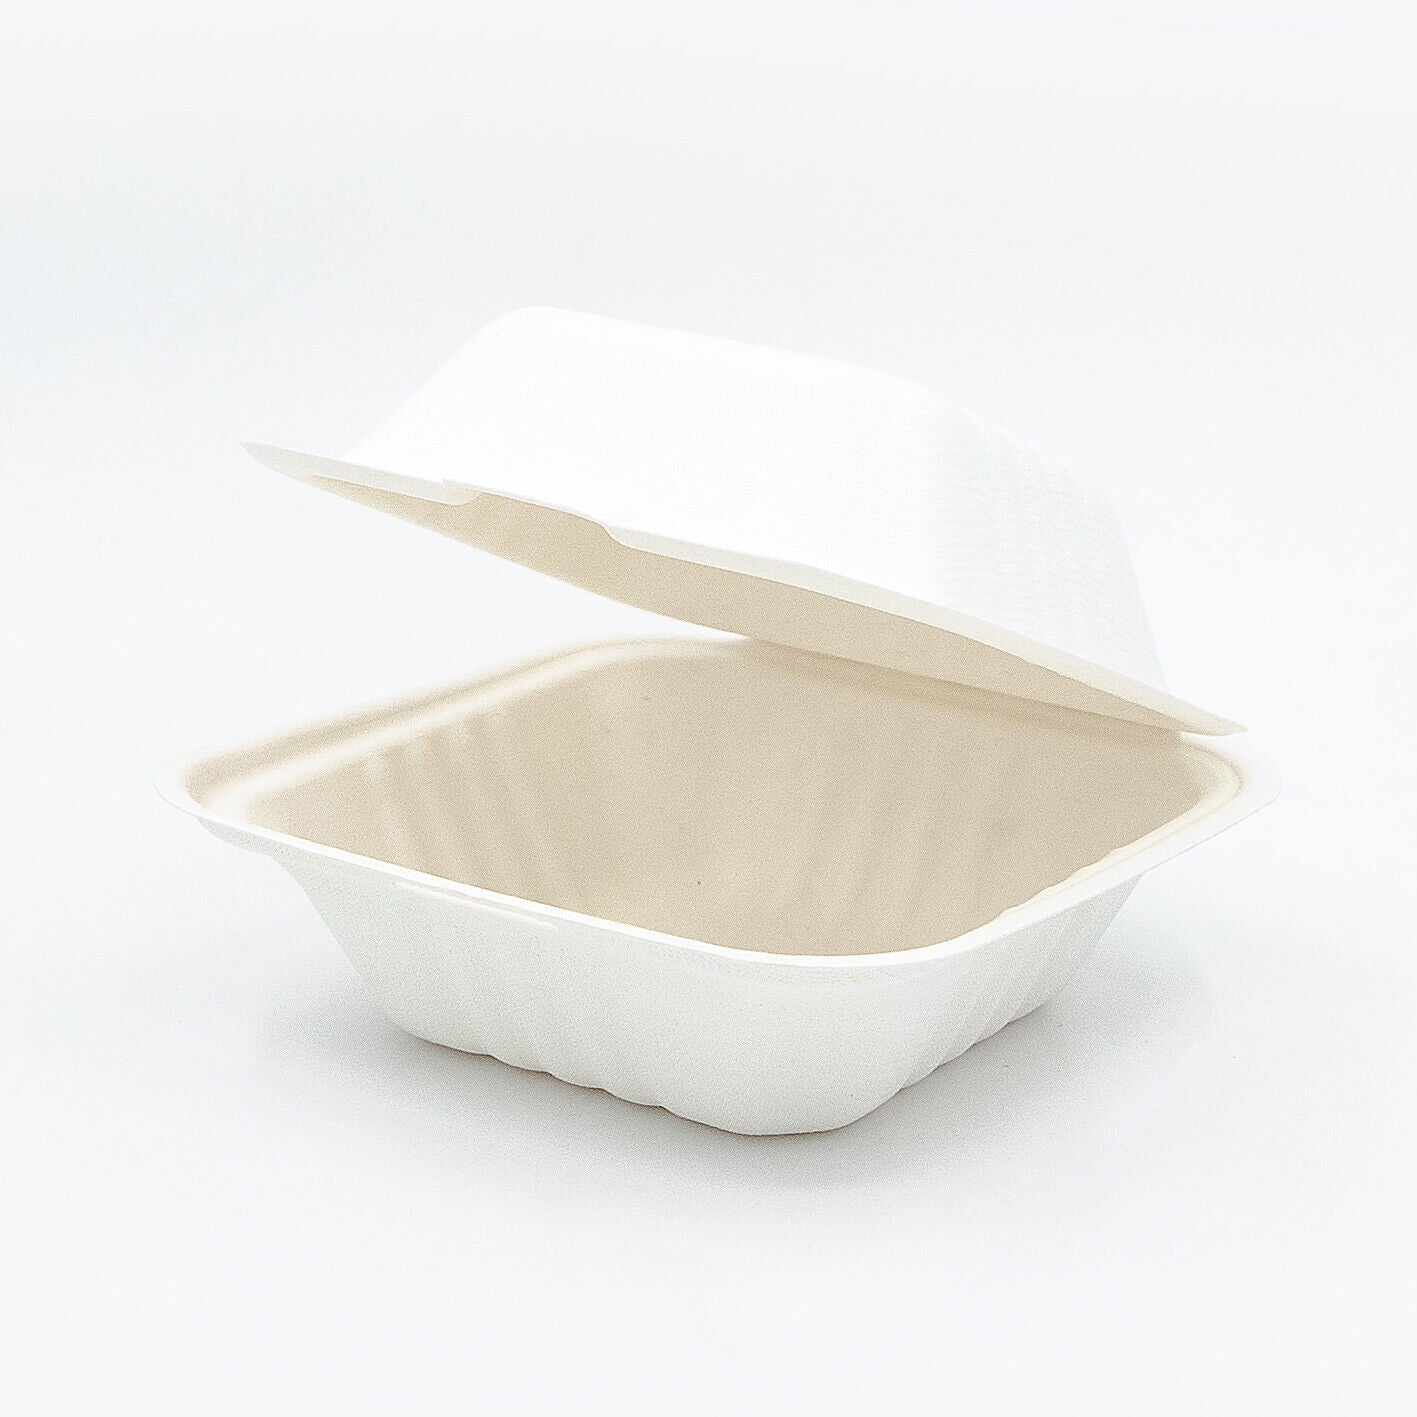 6 x 6 x 3 Sugarcane Clamshell Compostable Takeaway Food Containers 663 x500